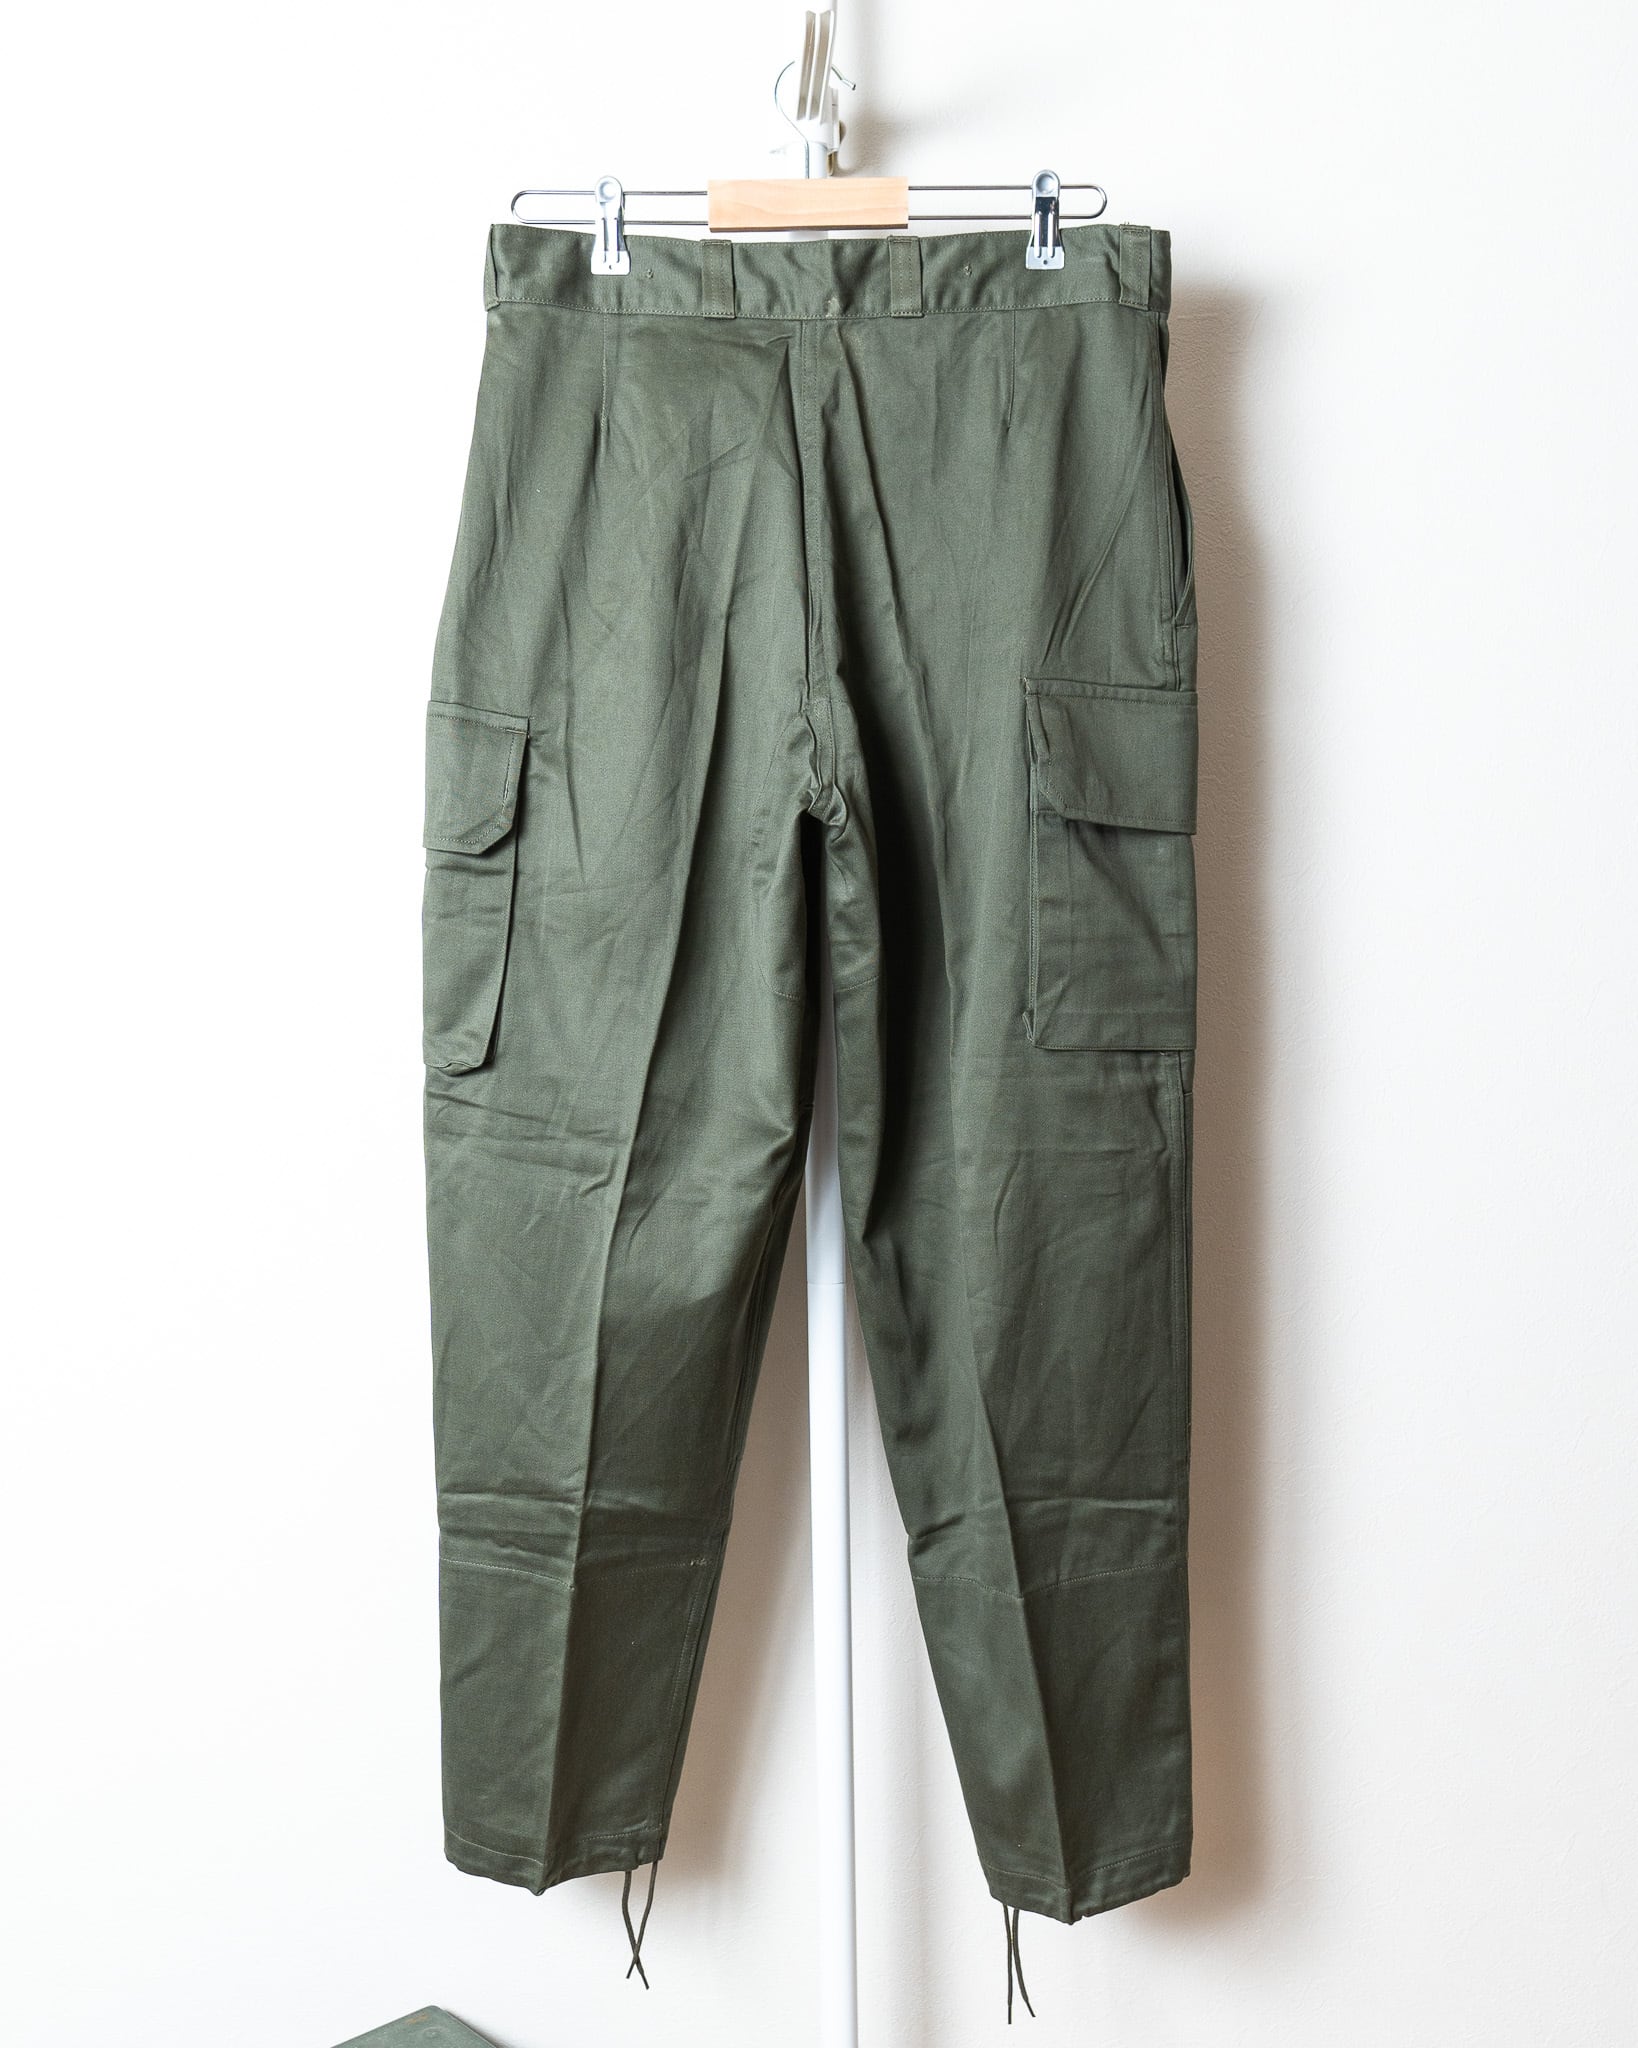 【DEADSTOCK】French Army M-64 Field Trousers デッドストック フランス軍 実物 M64 カーゴパンツ  レアサイズ 希少 | FAR EAST SIGNAL powered by BASE